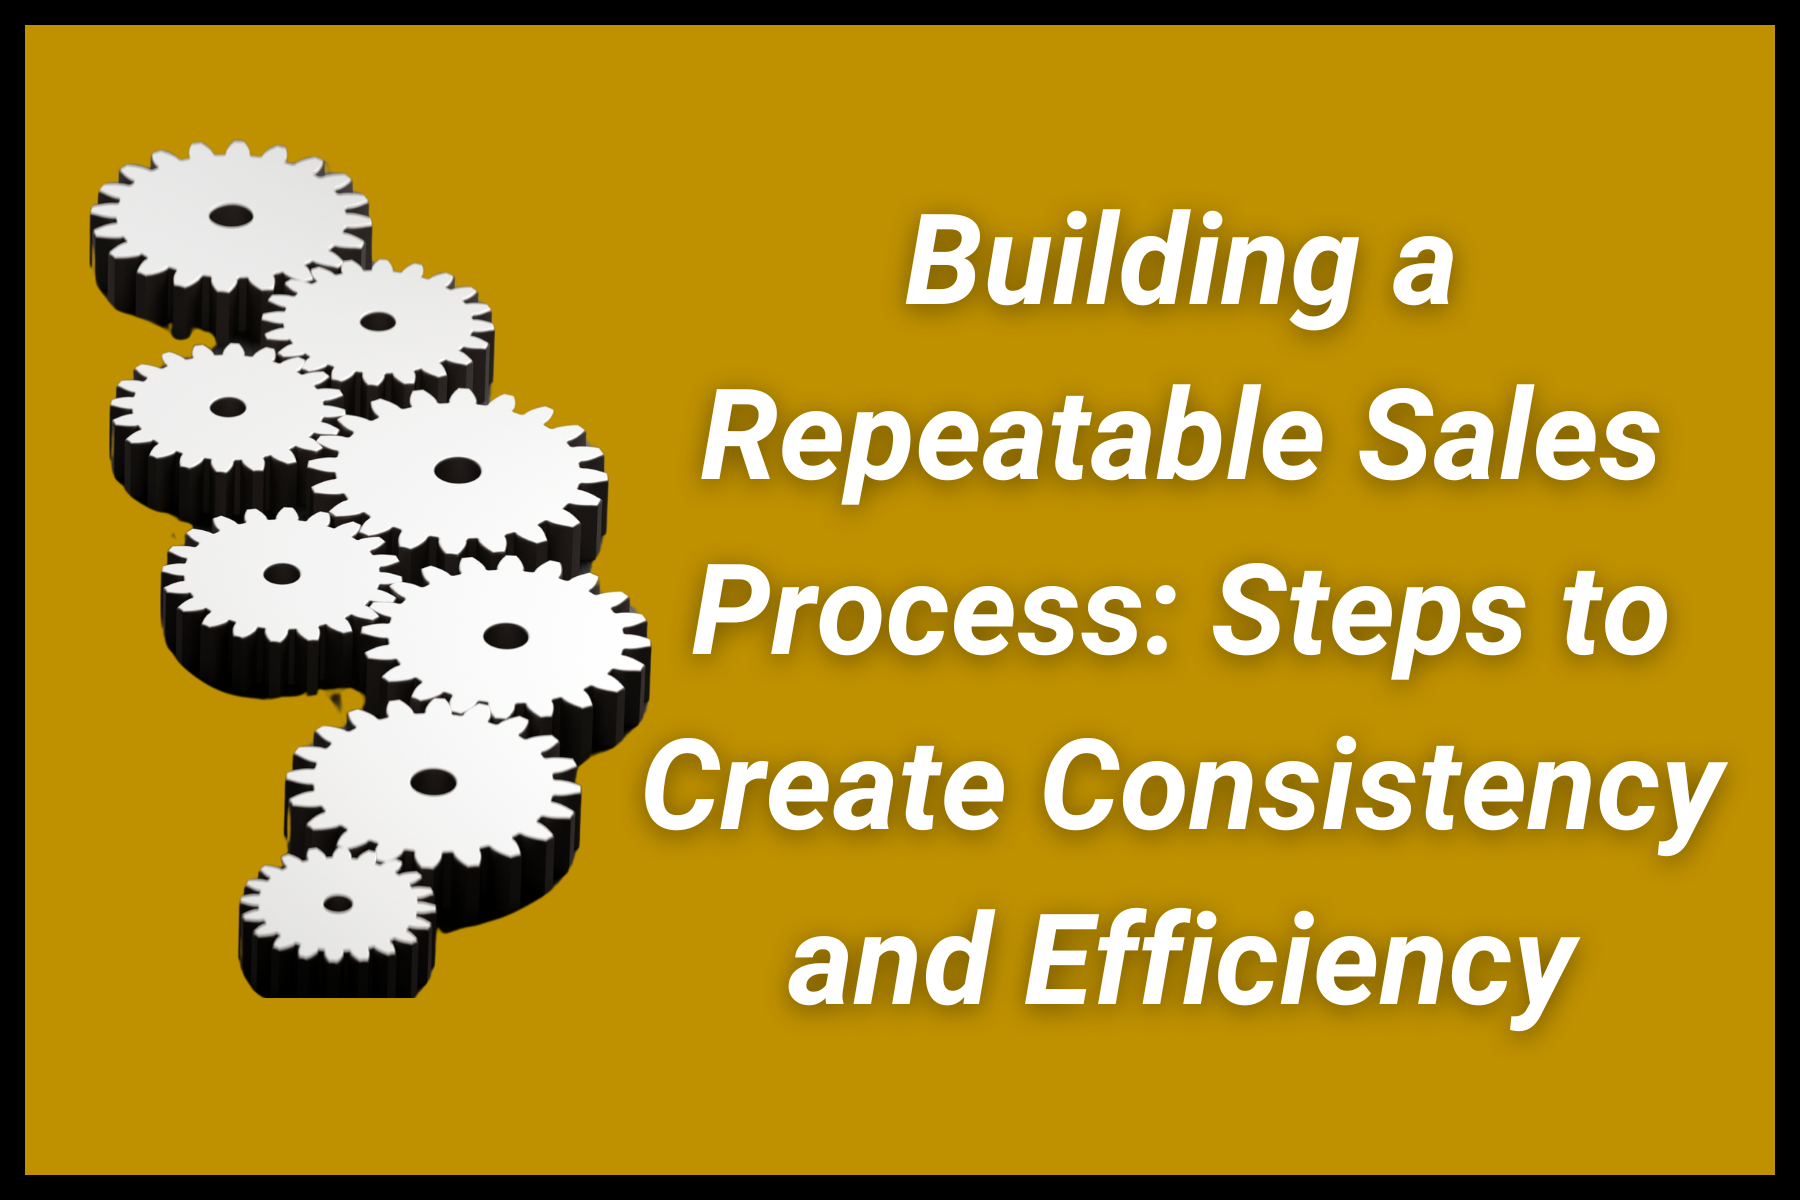 Building a Repeatable Sales Process: Steps to Create Consistency and Efficiency